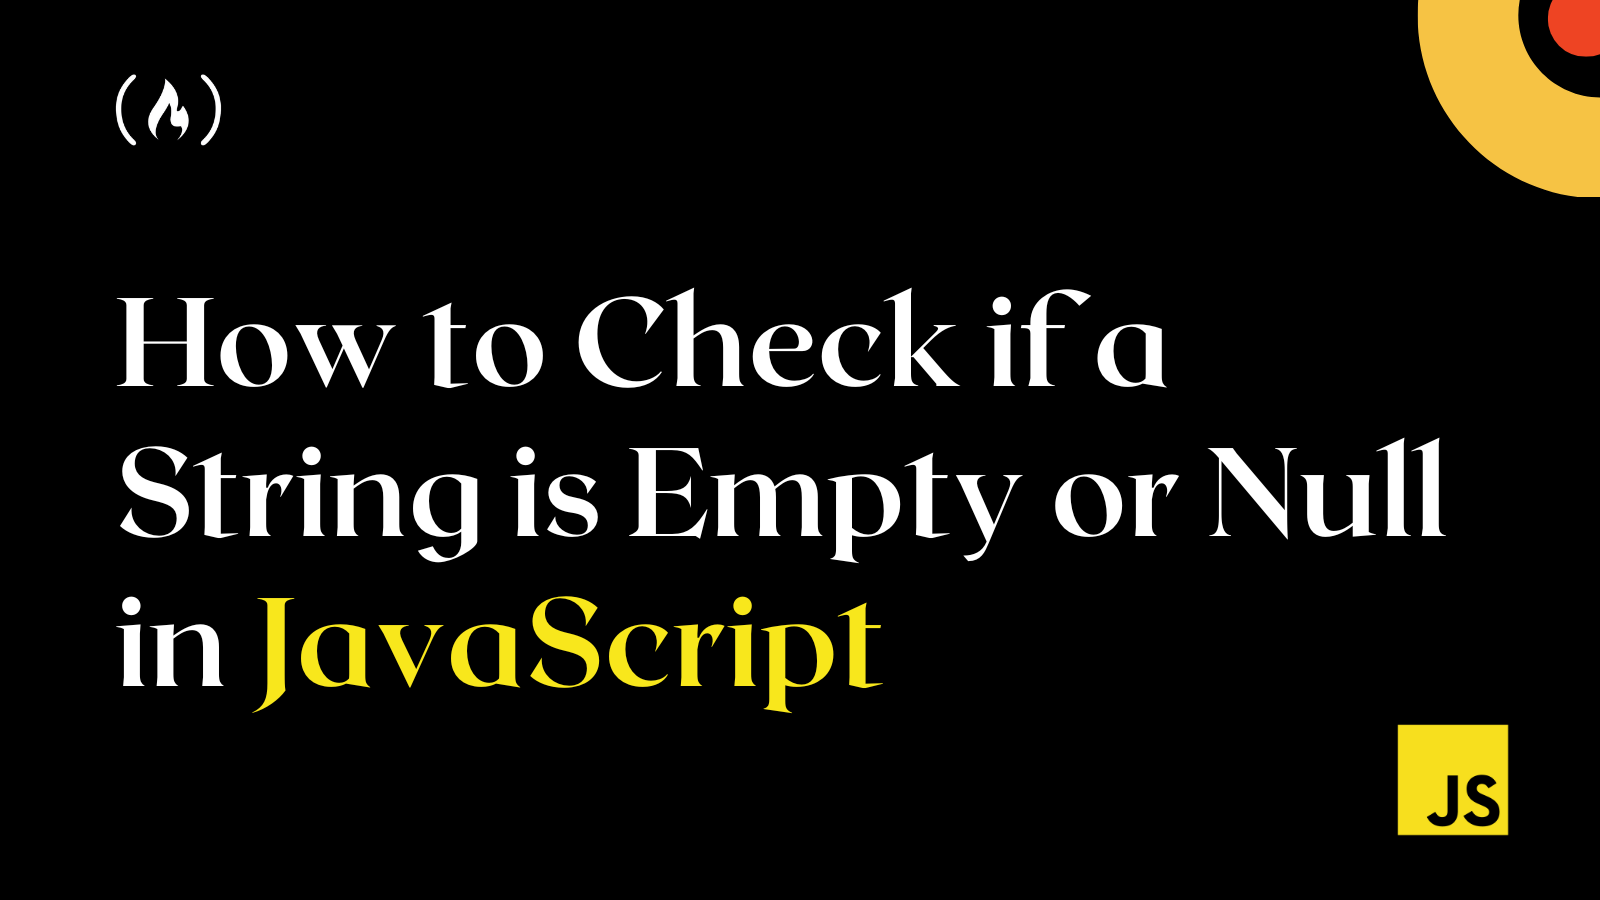 how-to-check-if-a-string-is-empty-or-null-in-javascript-js-tutorial-trendradars